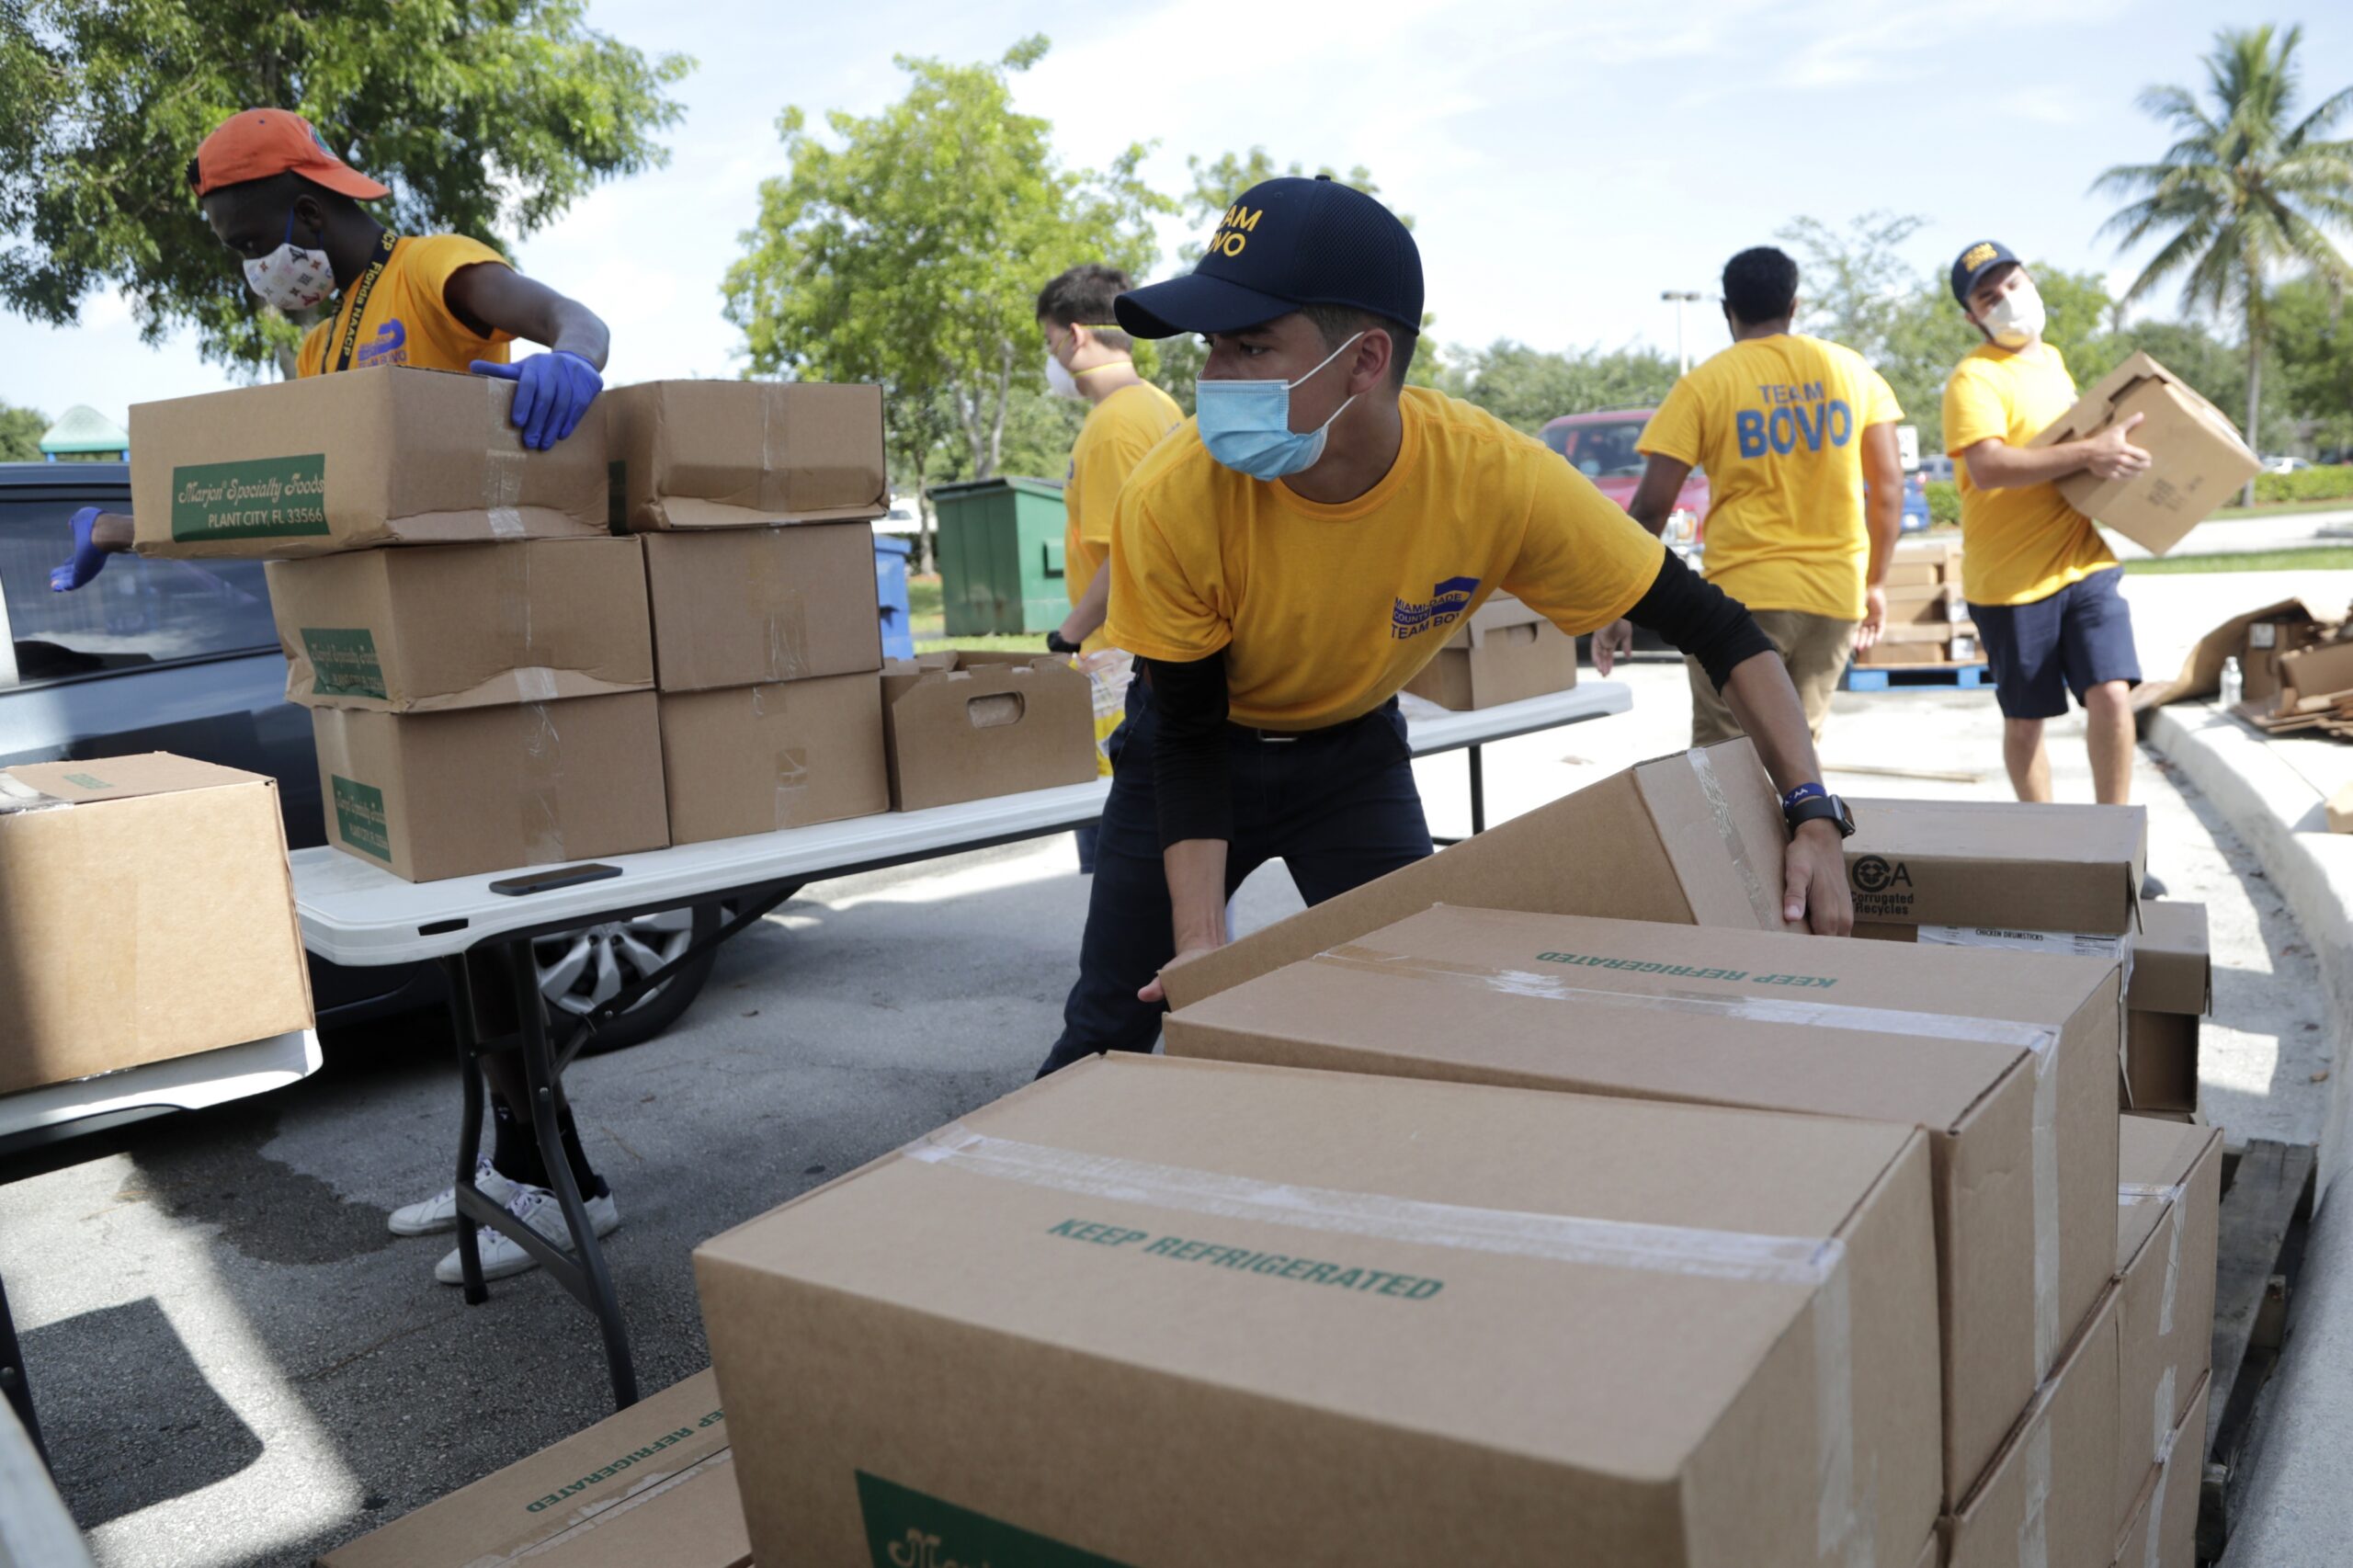 Nicholas Martinez stacks boxes of produce at a free drive-through food distribution in Florida.